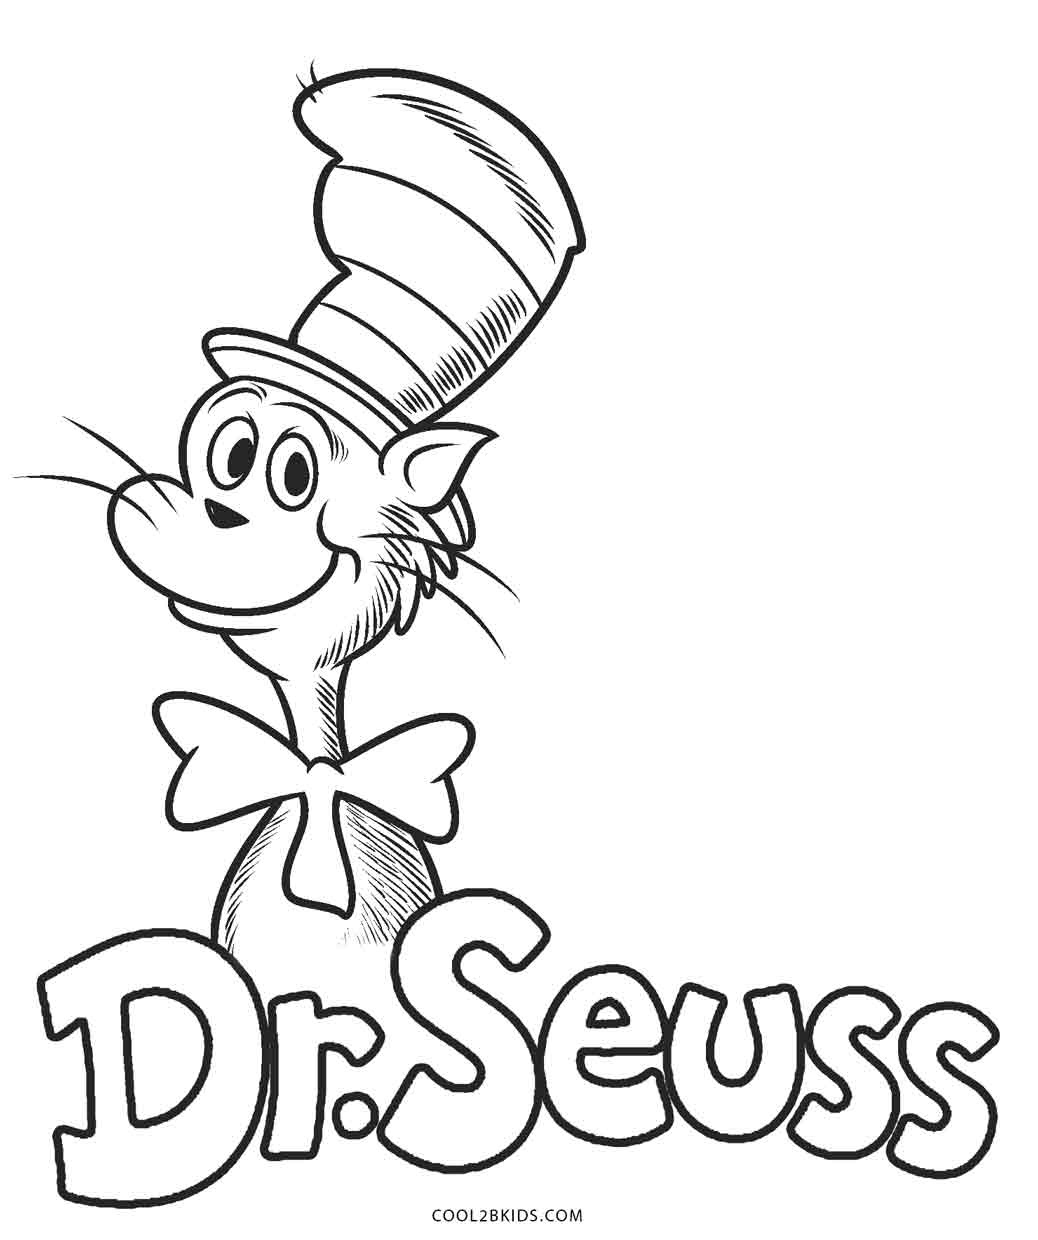 Free Printable Dr Seuss Coloring Pages For Kids | Cool2Bkids - Free Printable Dr Seuss Characters